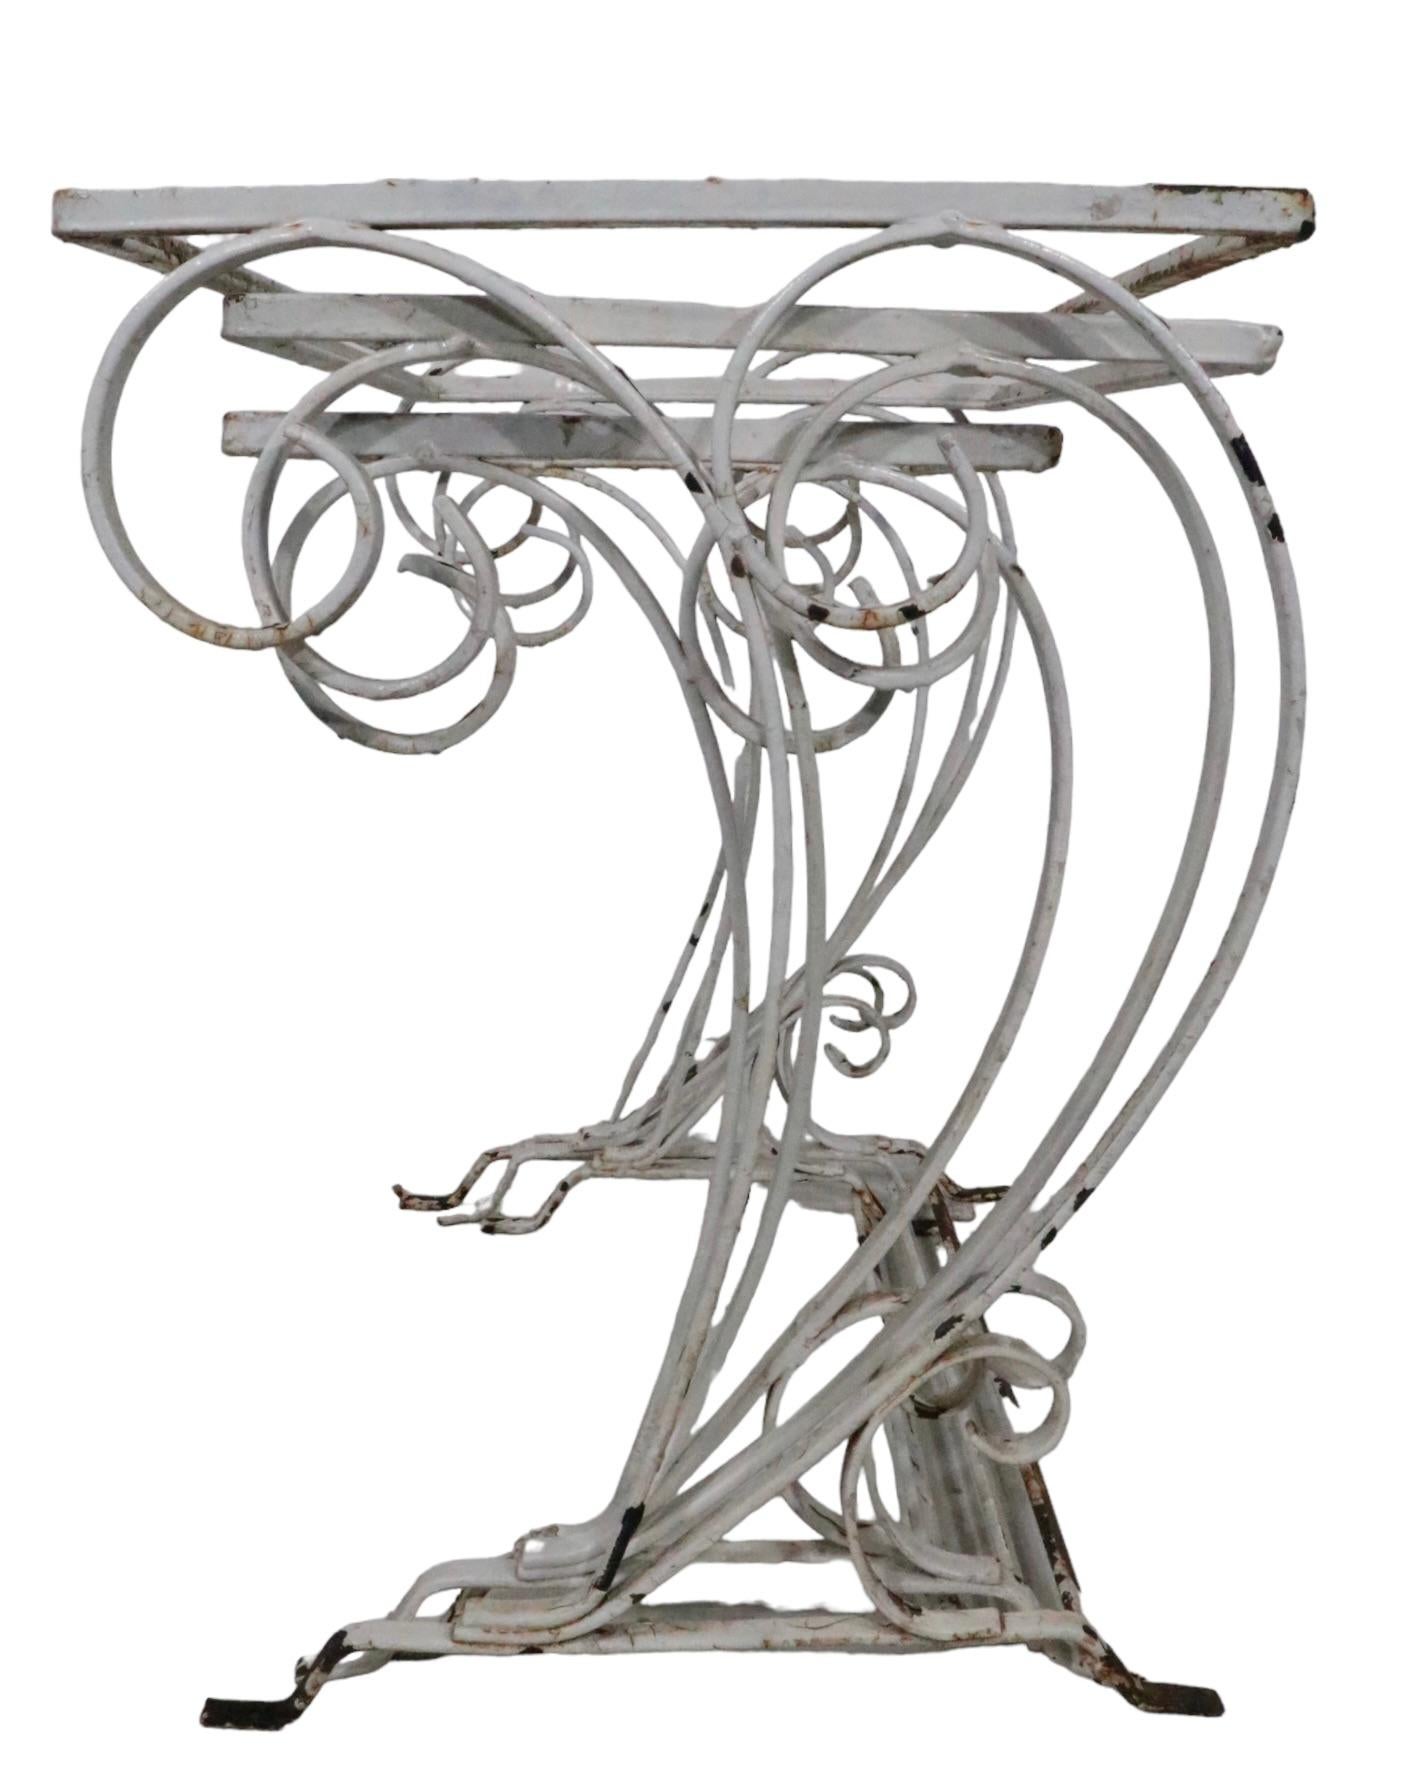 Chic set of three graduated size nesting tables in wrought iron, attributed to Salterini. The tables feature a decorative flowing wave like repeat as vertical supports, which support the rectangular top. The tables are all structurally sound, and